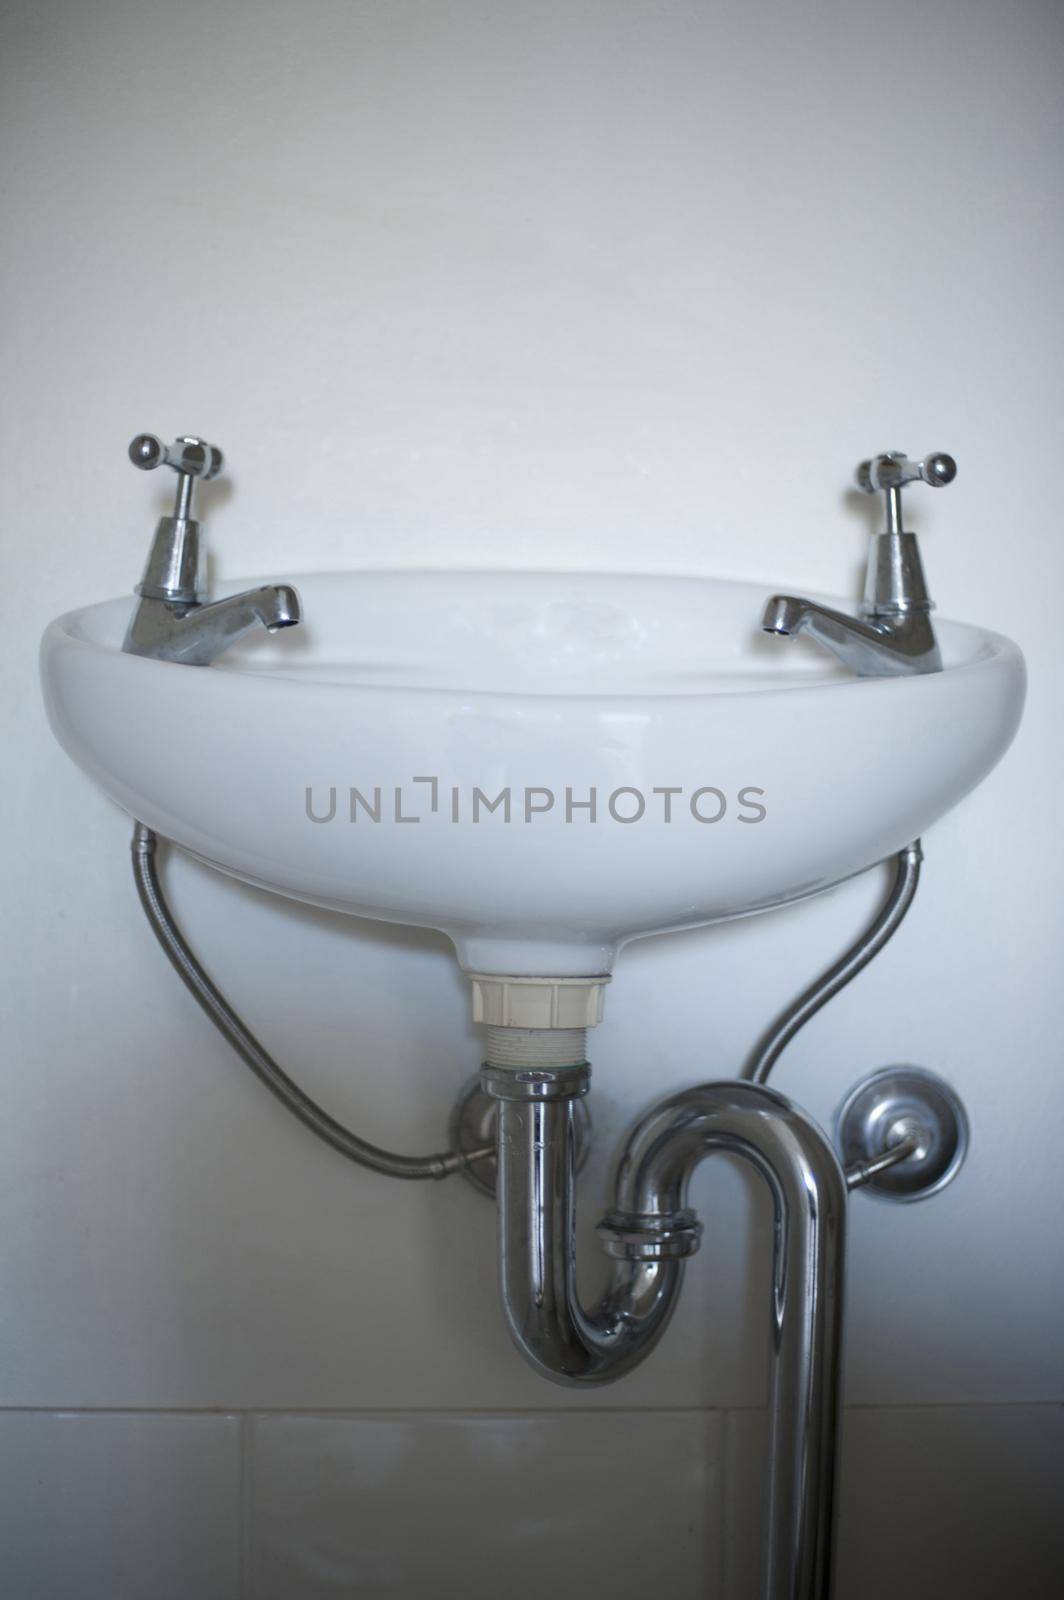 Simple ceramic white hand basin viewed low angle to show the pipes and plumbing mounted on a white wall in a restroom, or bathroom